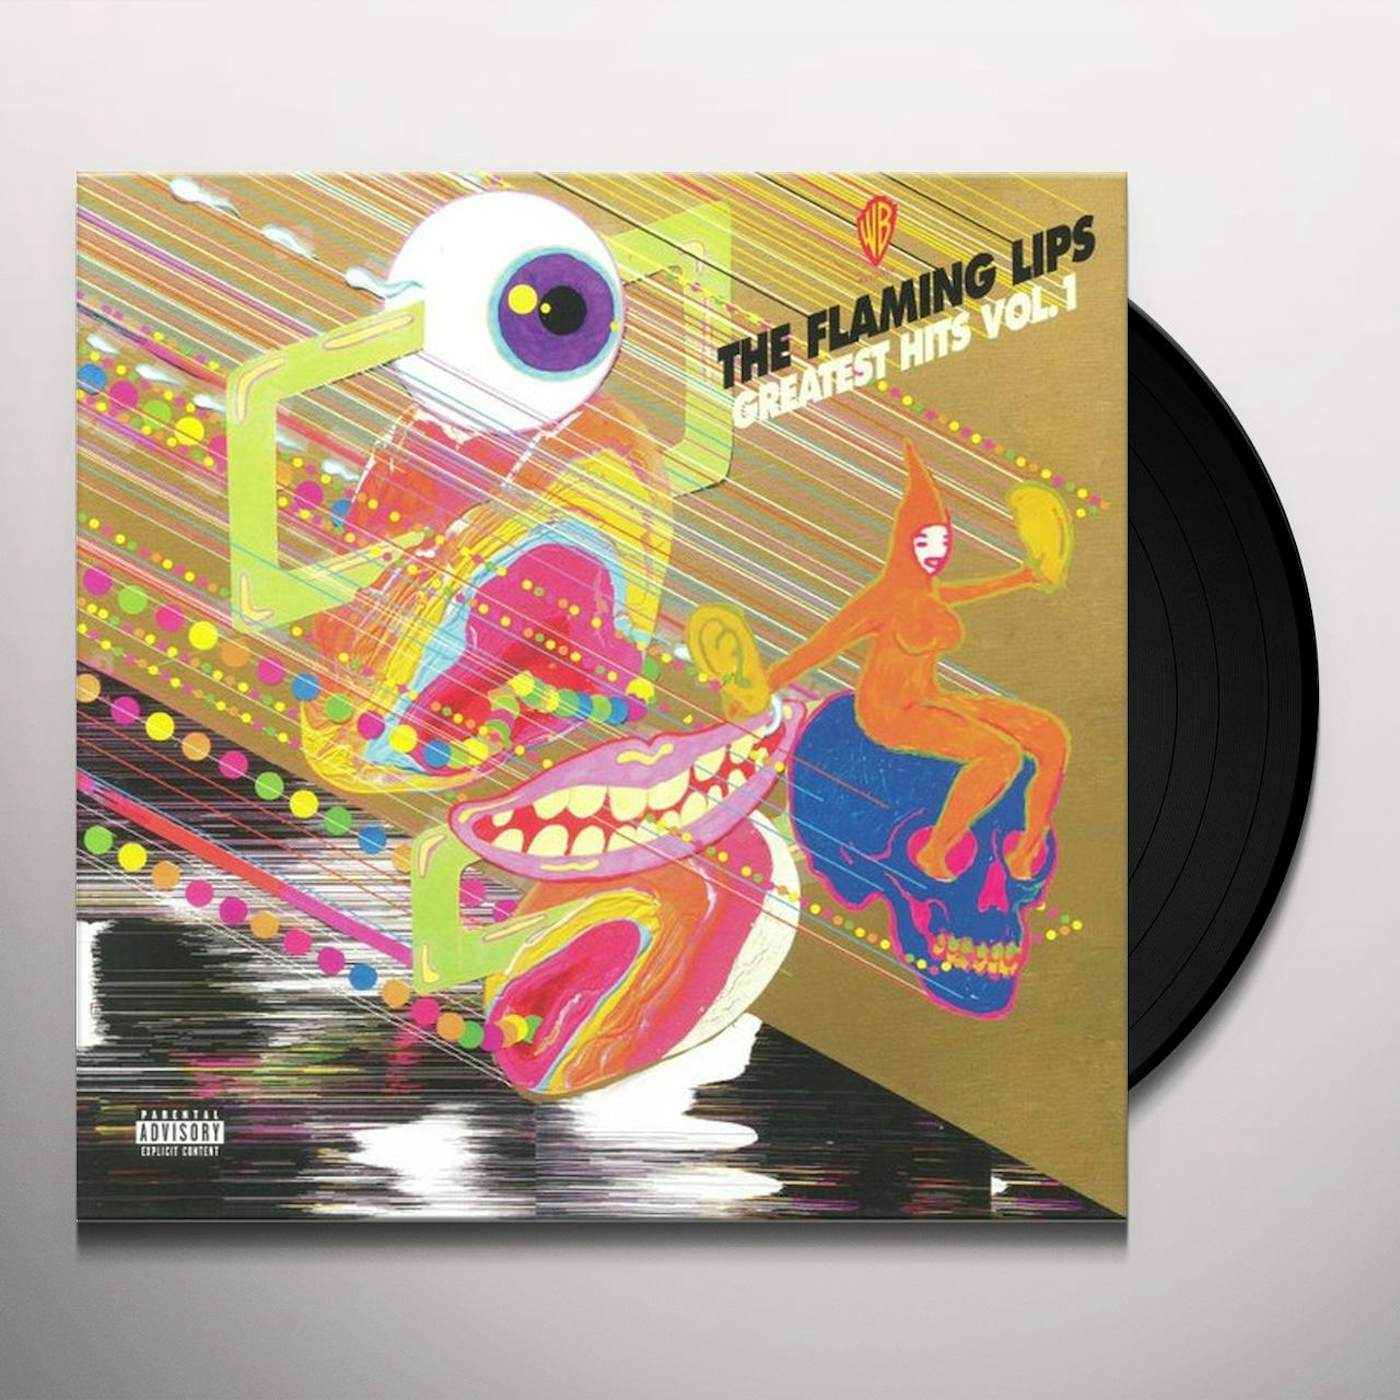 The Flaming Lips Greatest Hits, Vol. 1 (X) Vinyl Record